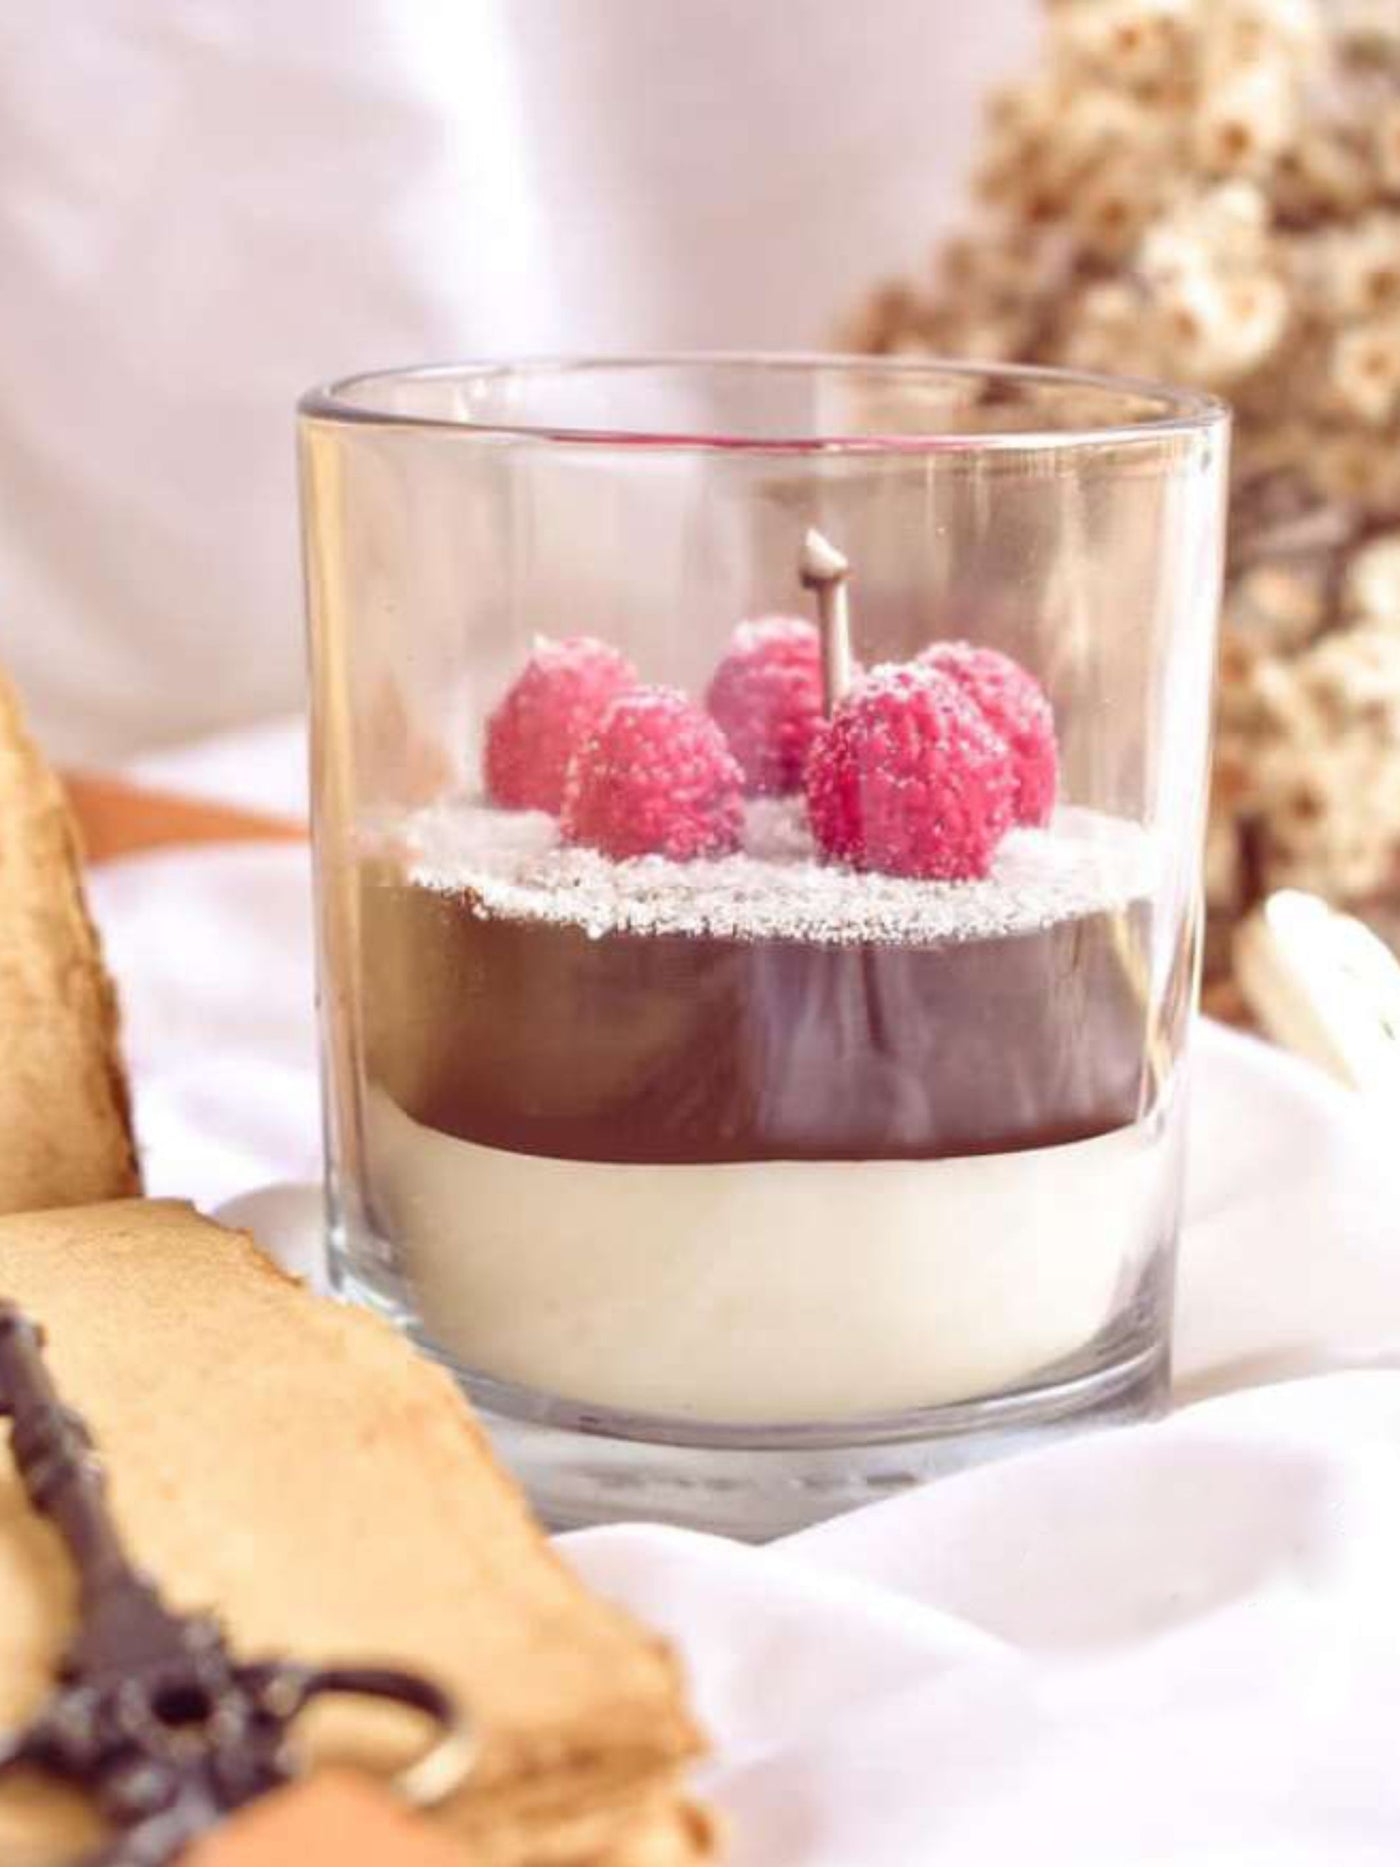 Soy Scented White Candle With Red Layer And Cherries On Top